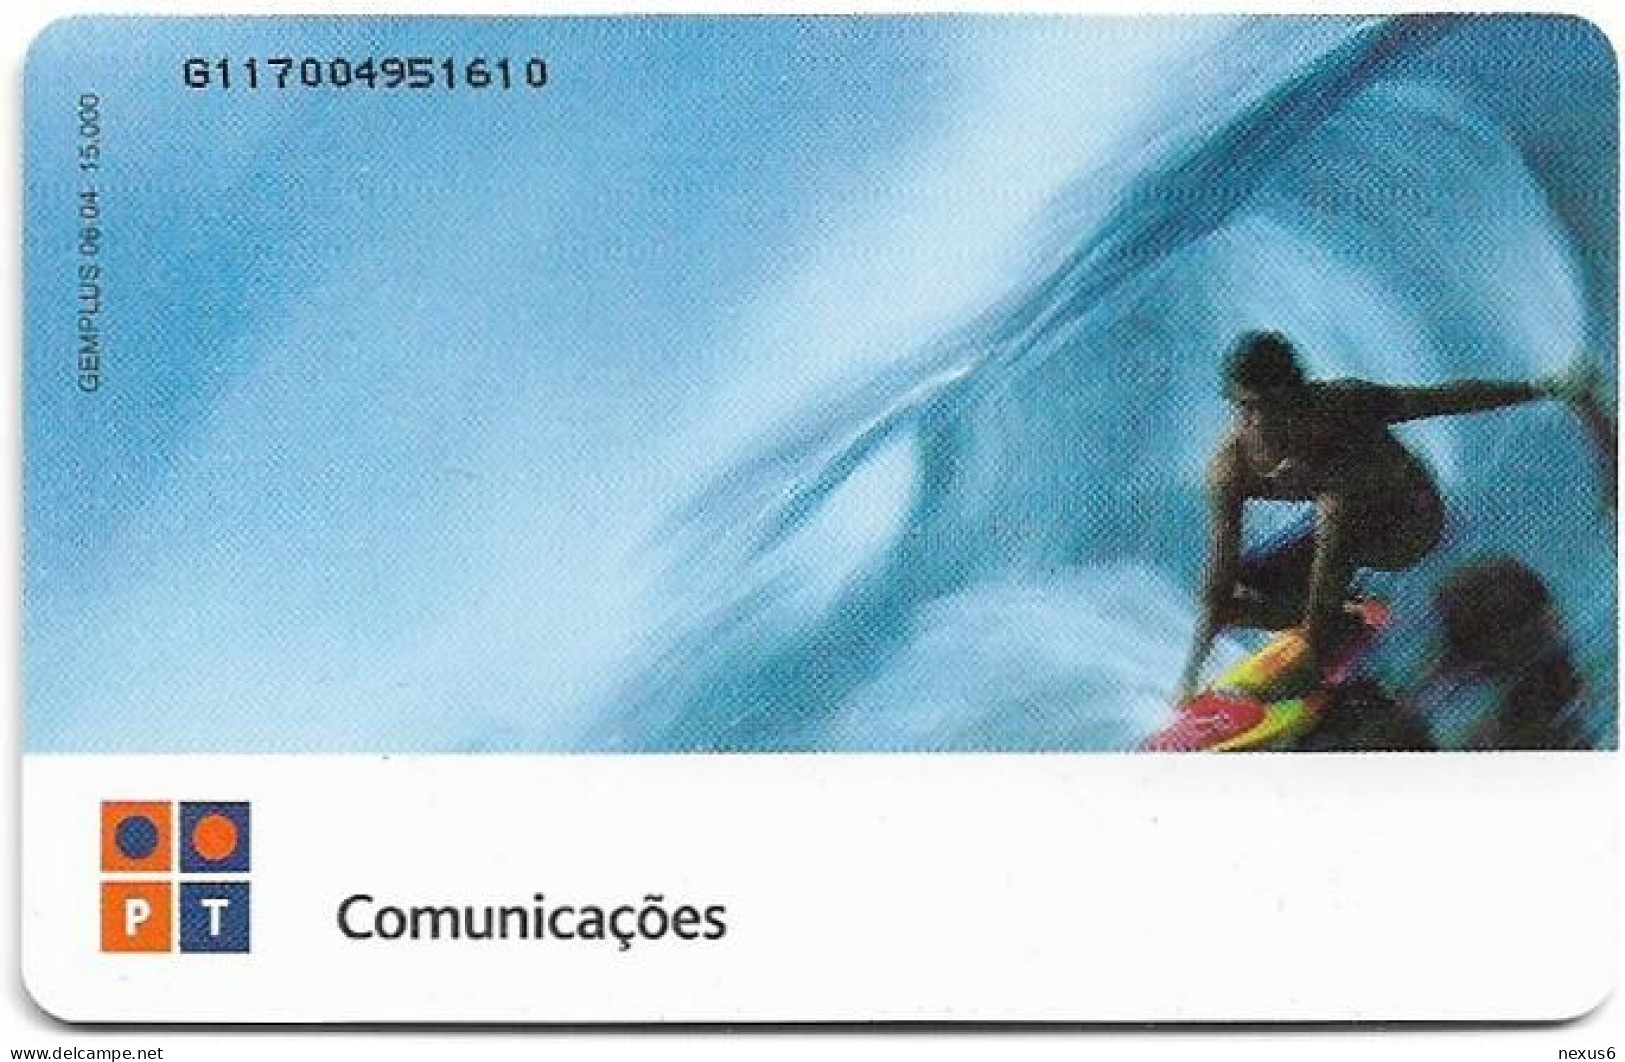 Portugal - PT (Chip) - Water Sports - Surfing - PT419 - 06.2004, 9€, 15.000ex, Used - Portugal